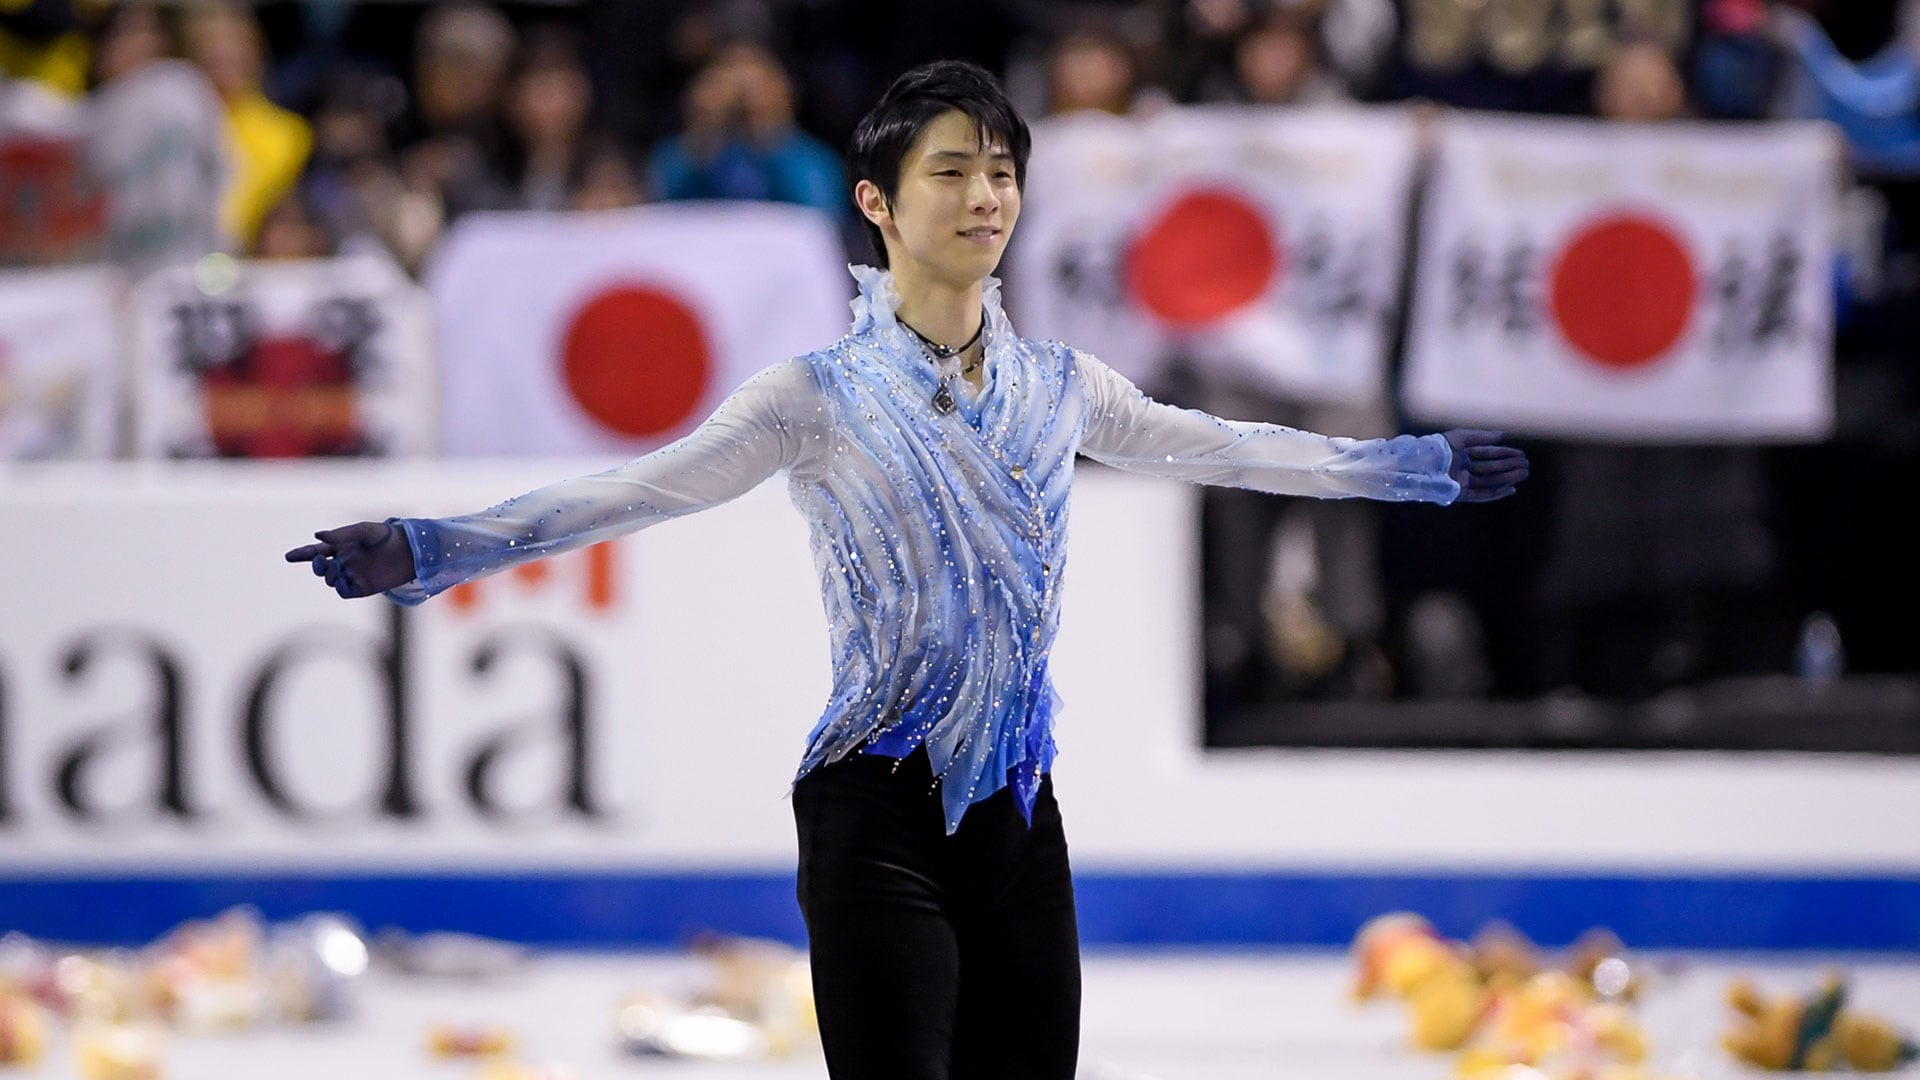 Yuzuru Hanyu out to 'complete' himself with quad Axel jump